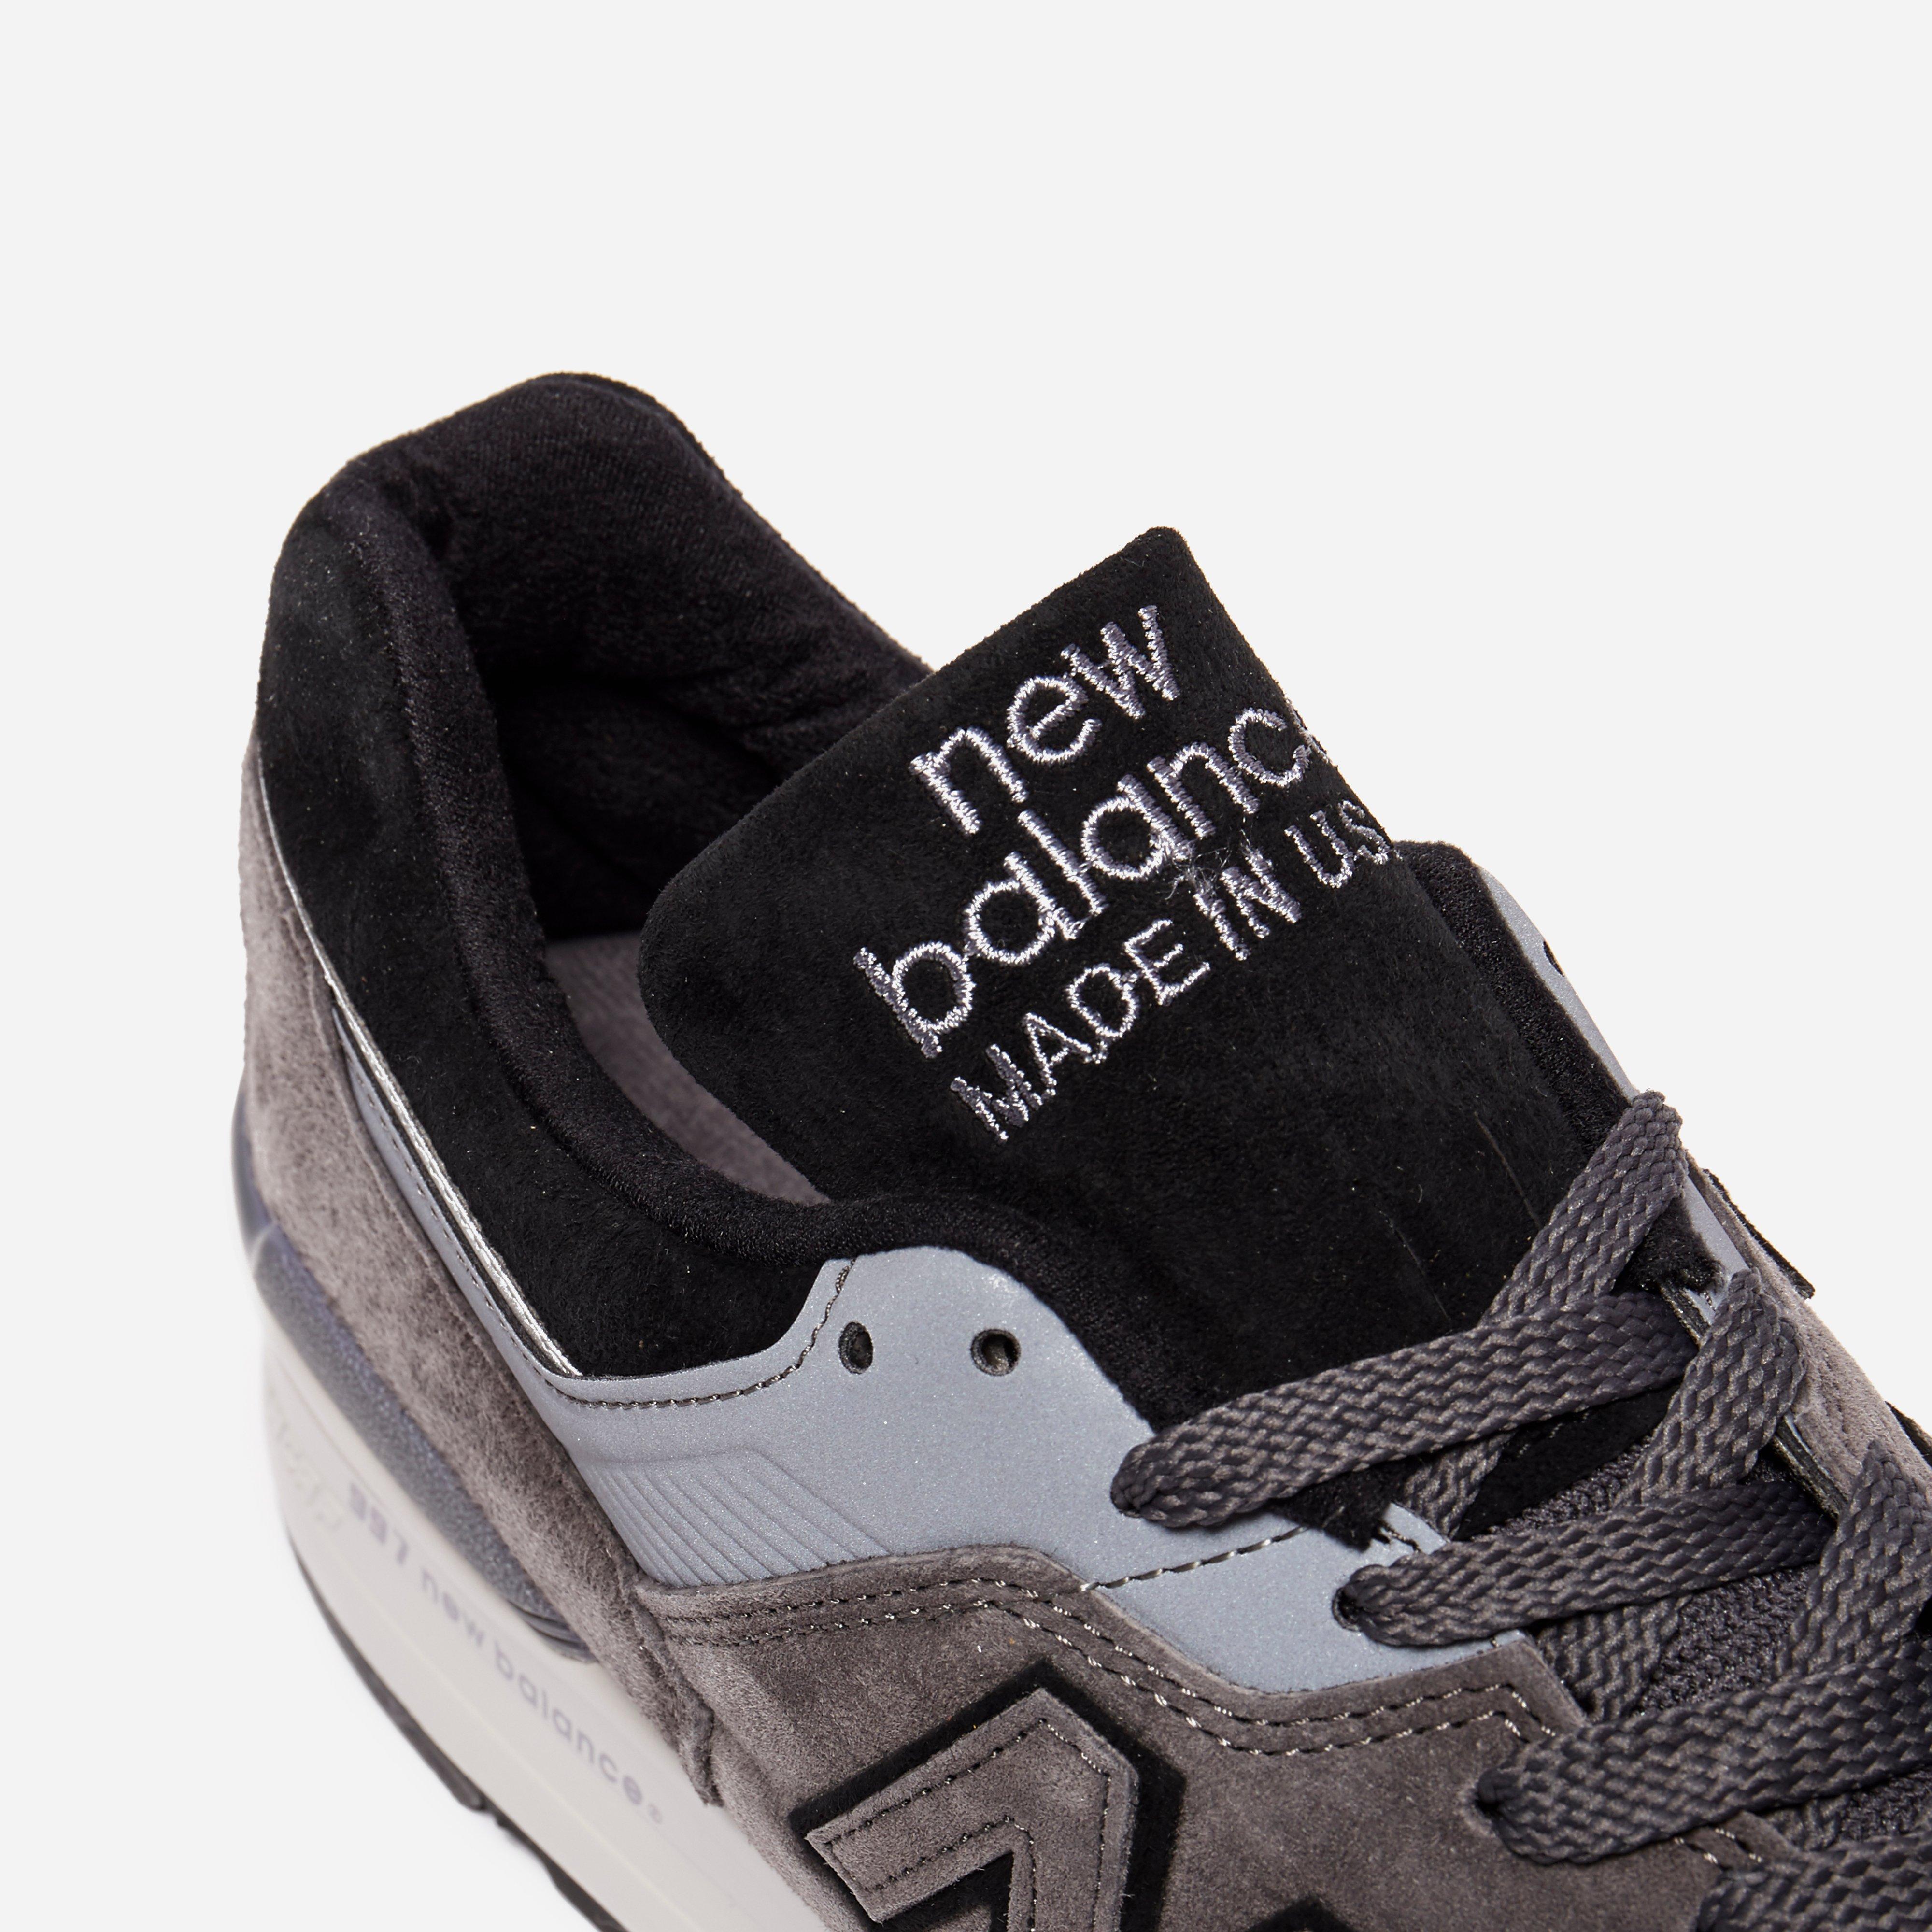 New Balance M997 Brk Made In Usa in Grey (Gray) for Men - Lyst